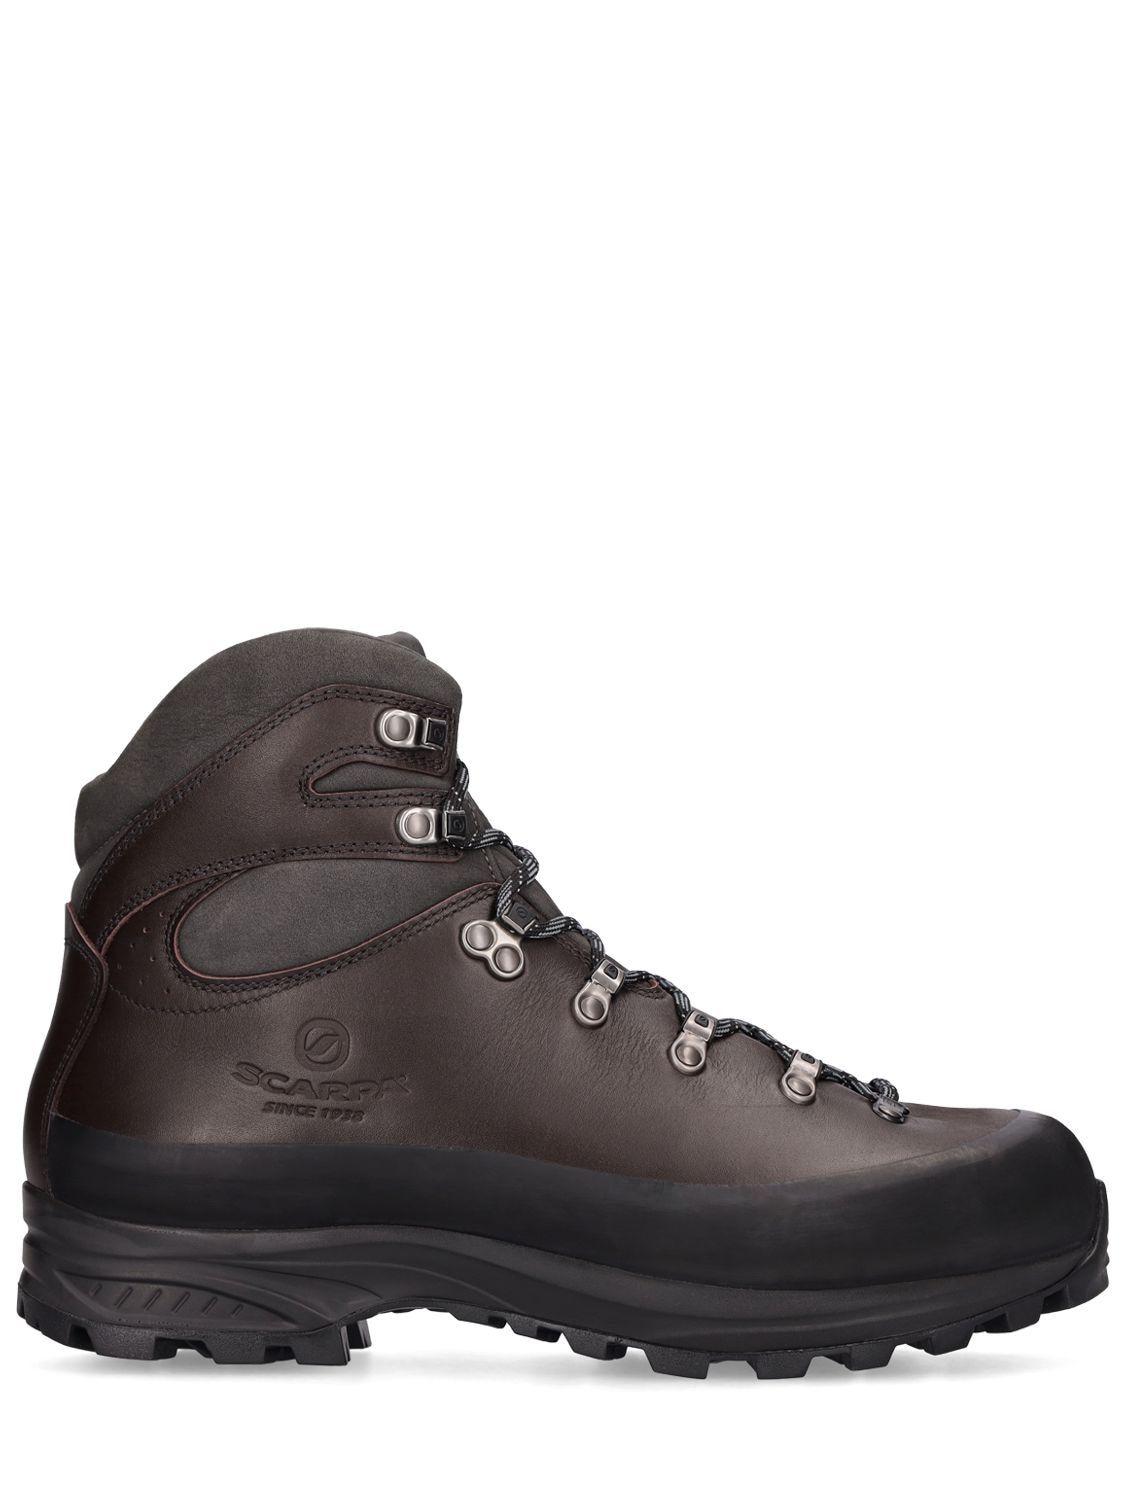 SCARPA Sl Active Hiking Boots in Brown for Men | Lyst